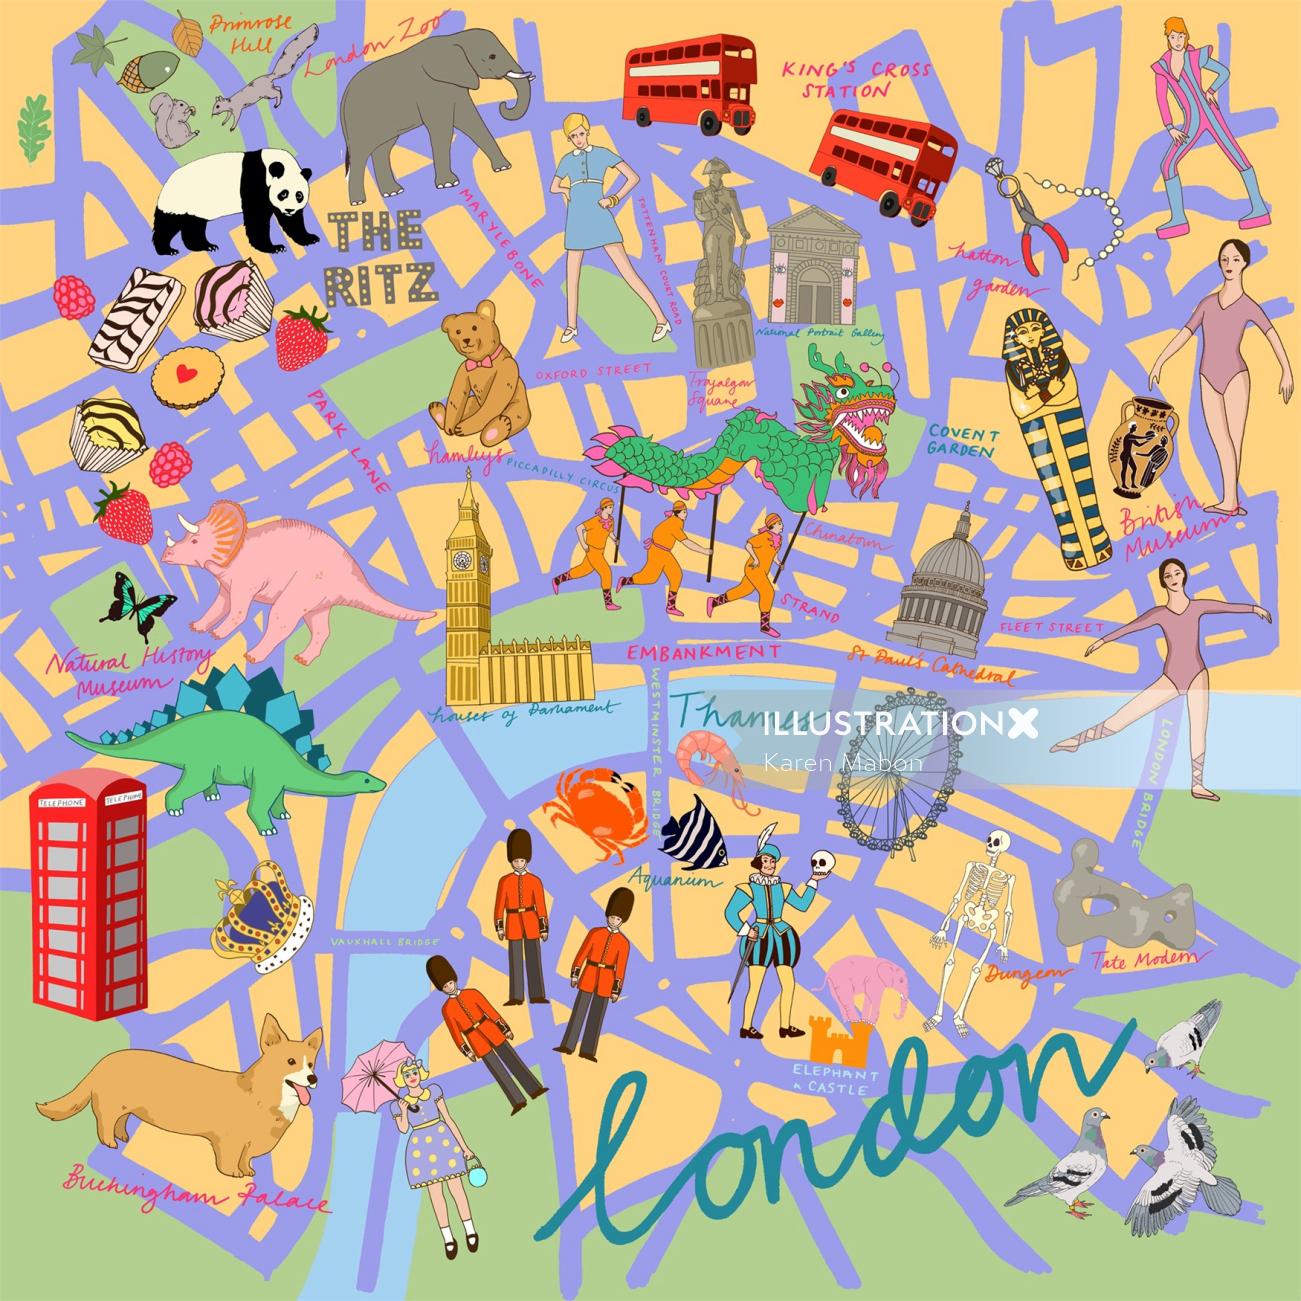 London streets illustration scarf by karen mabon for the National Portrait Gallery Shop